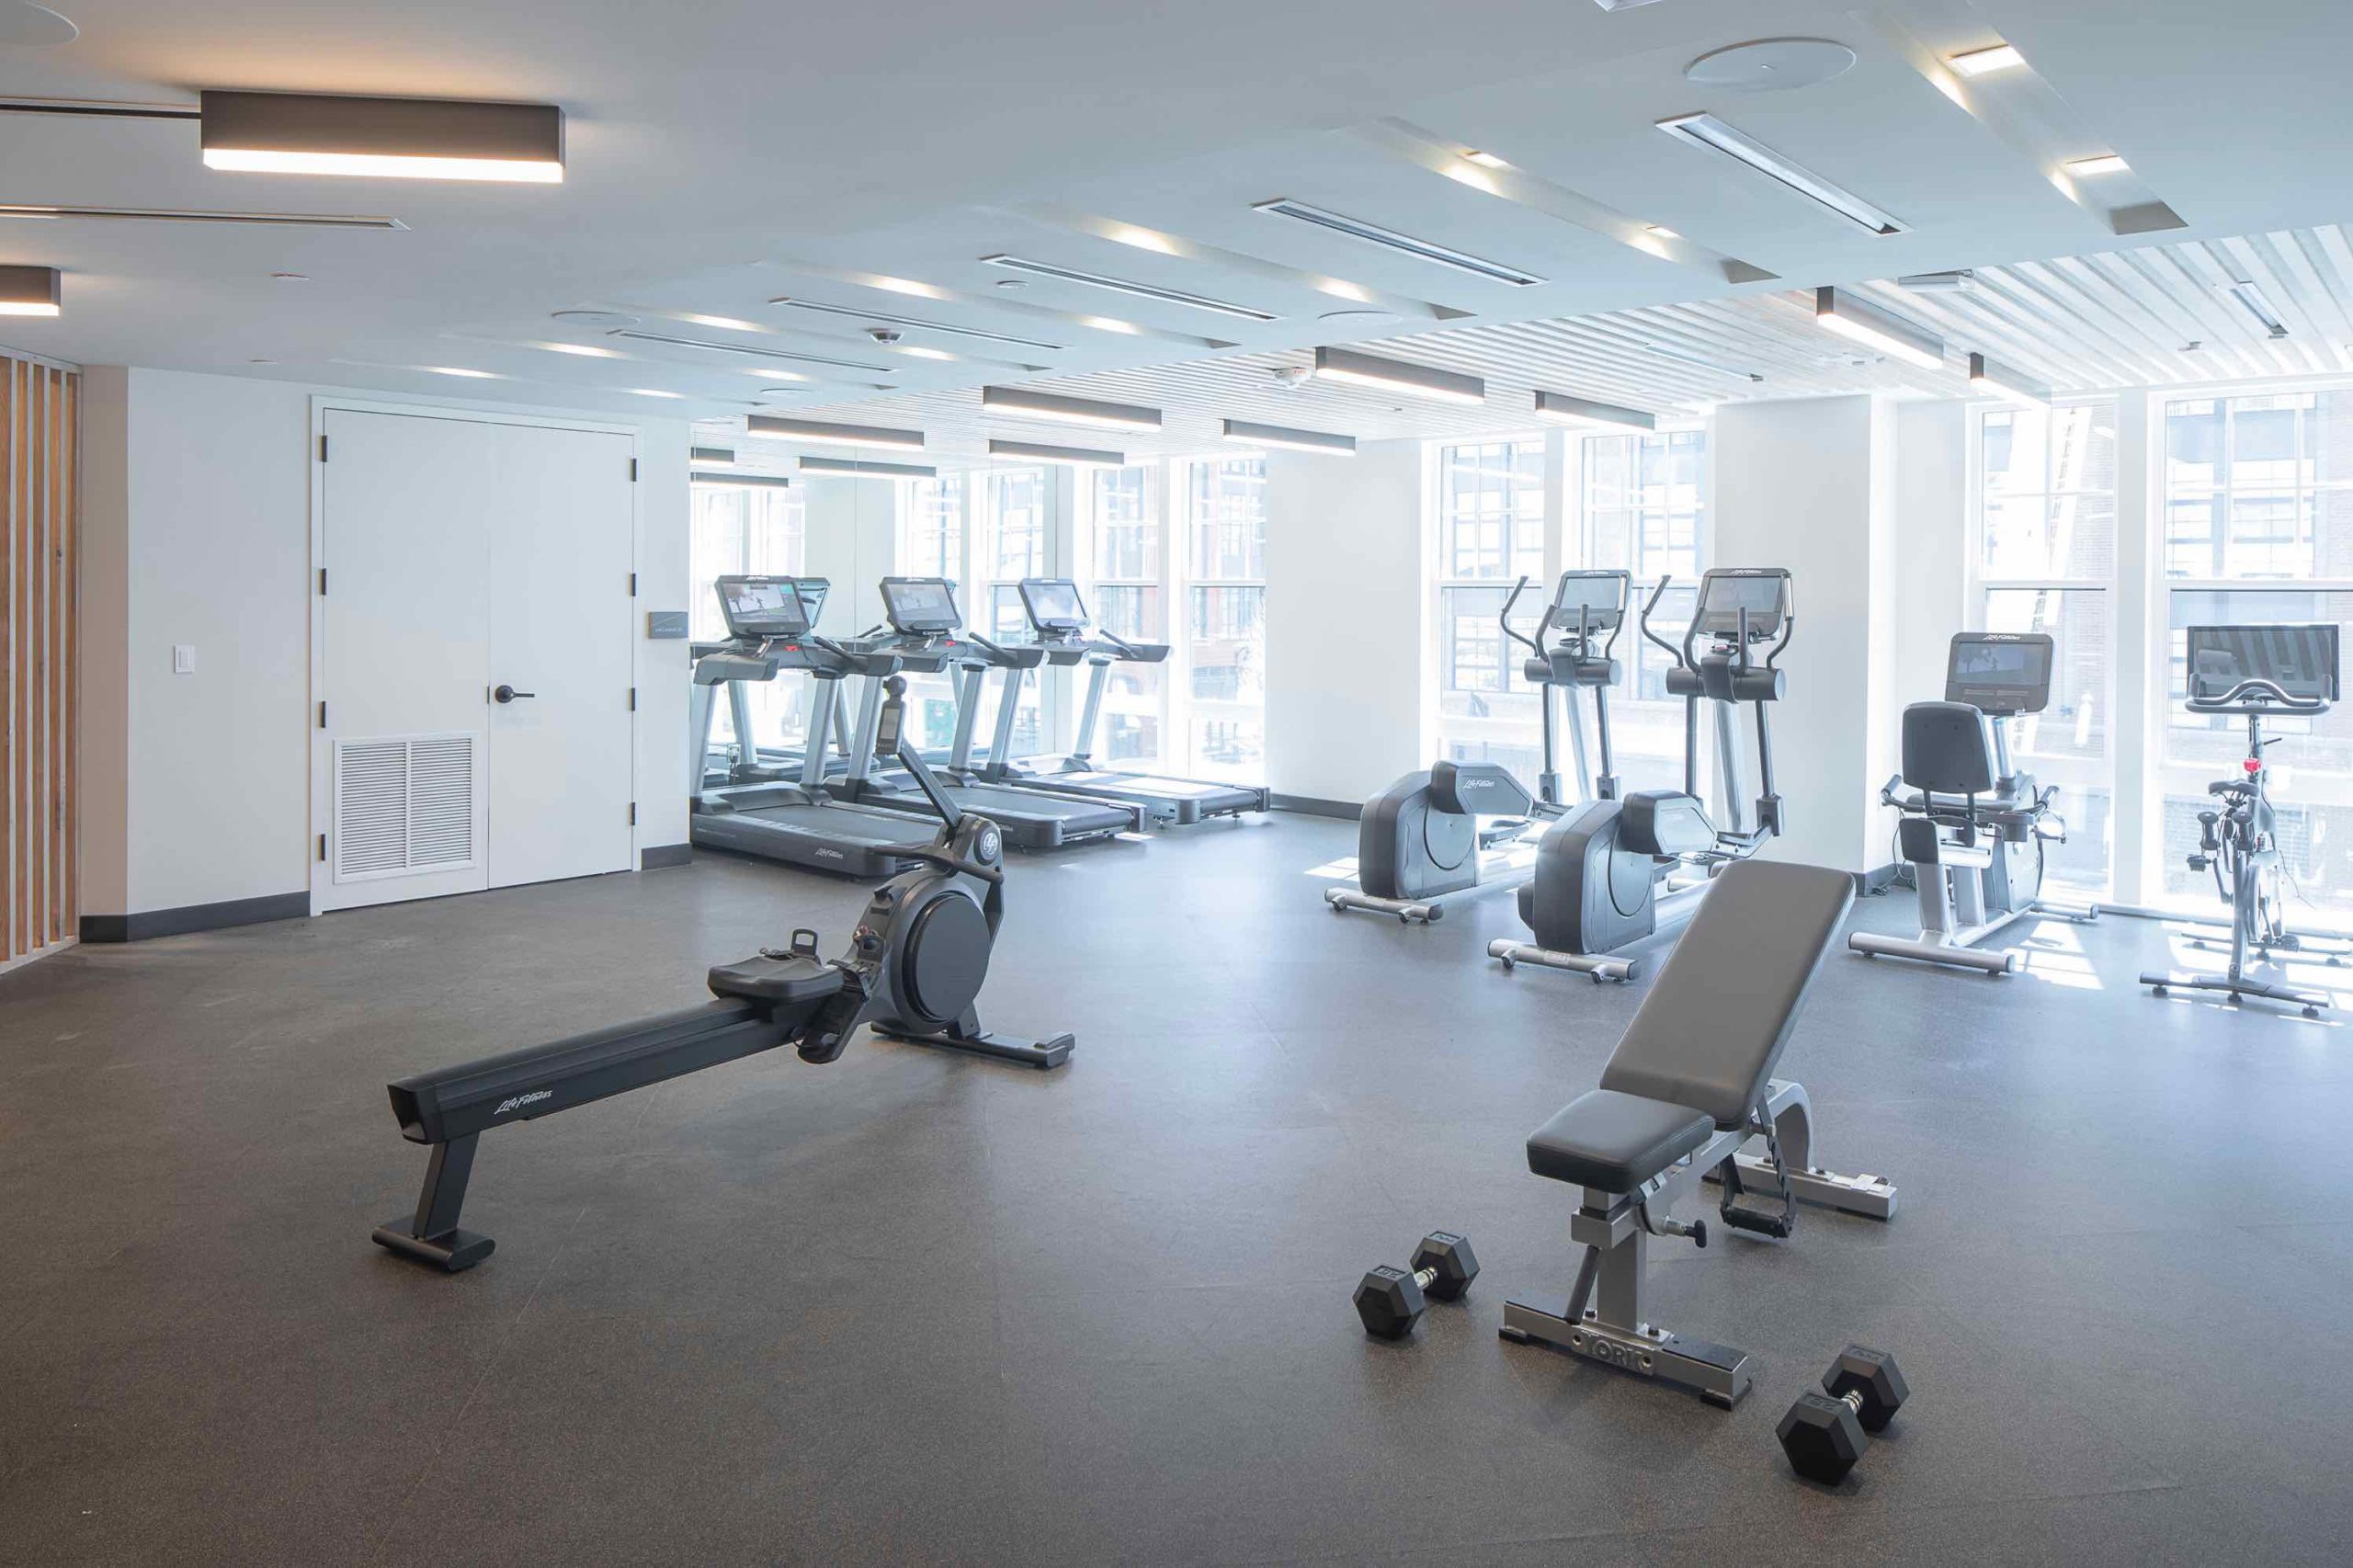 A fitness center with tread machines and exercise equipment. One of the amenities of 250 Mission in Baltimore, MD.